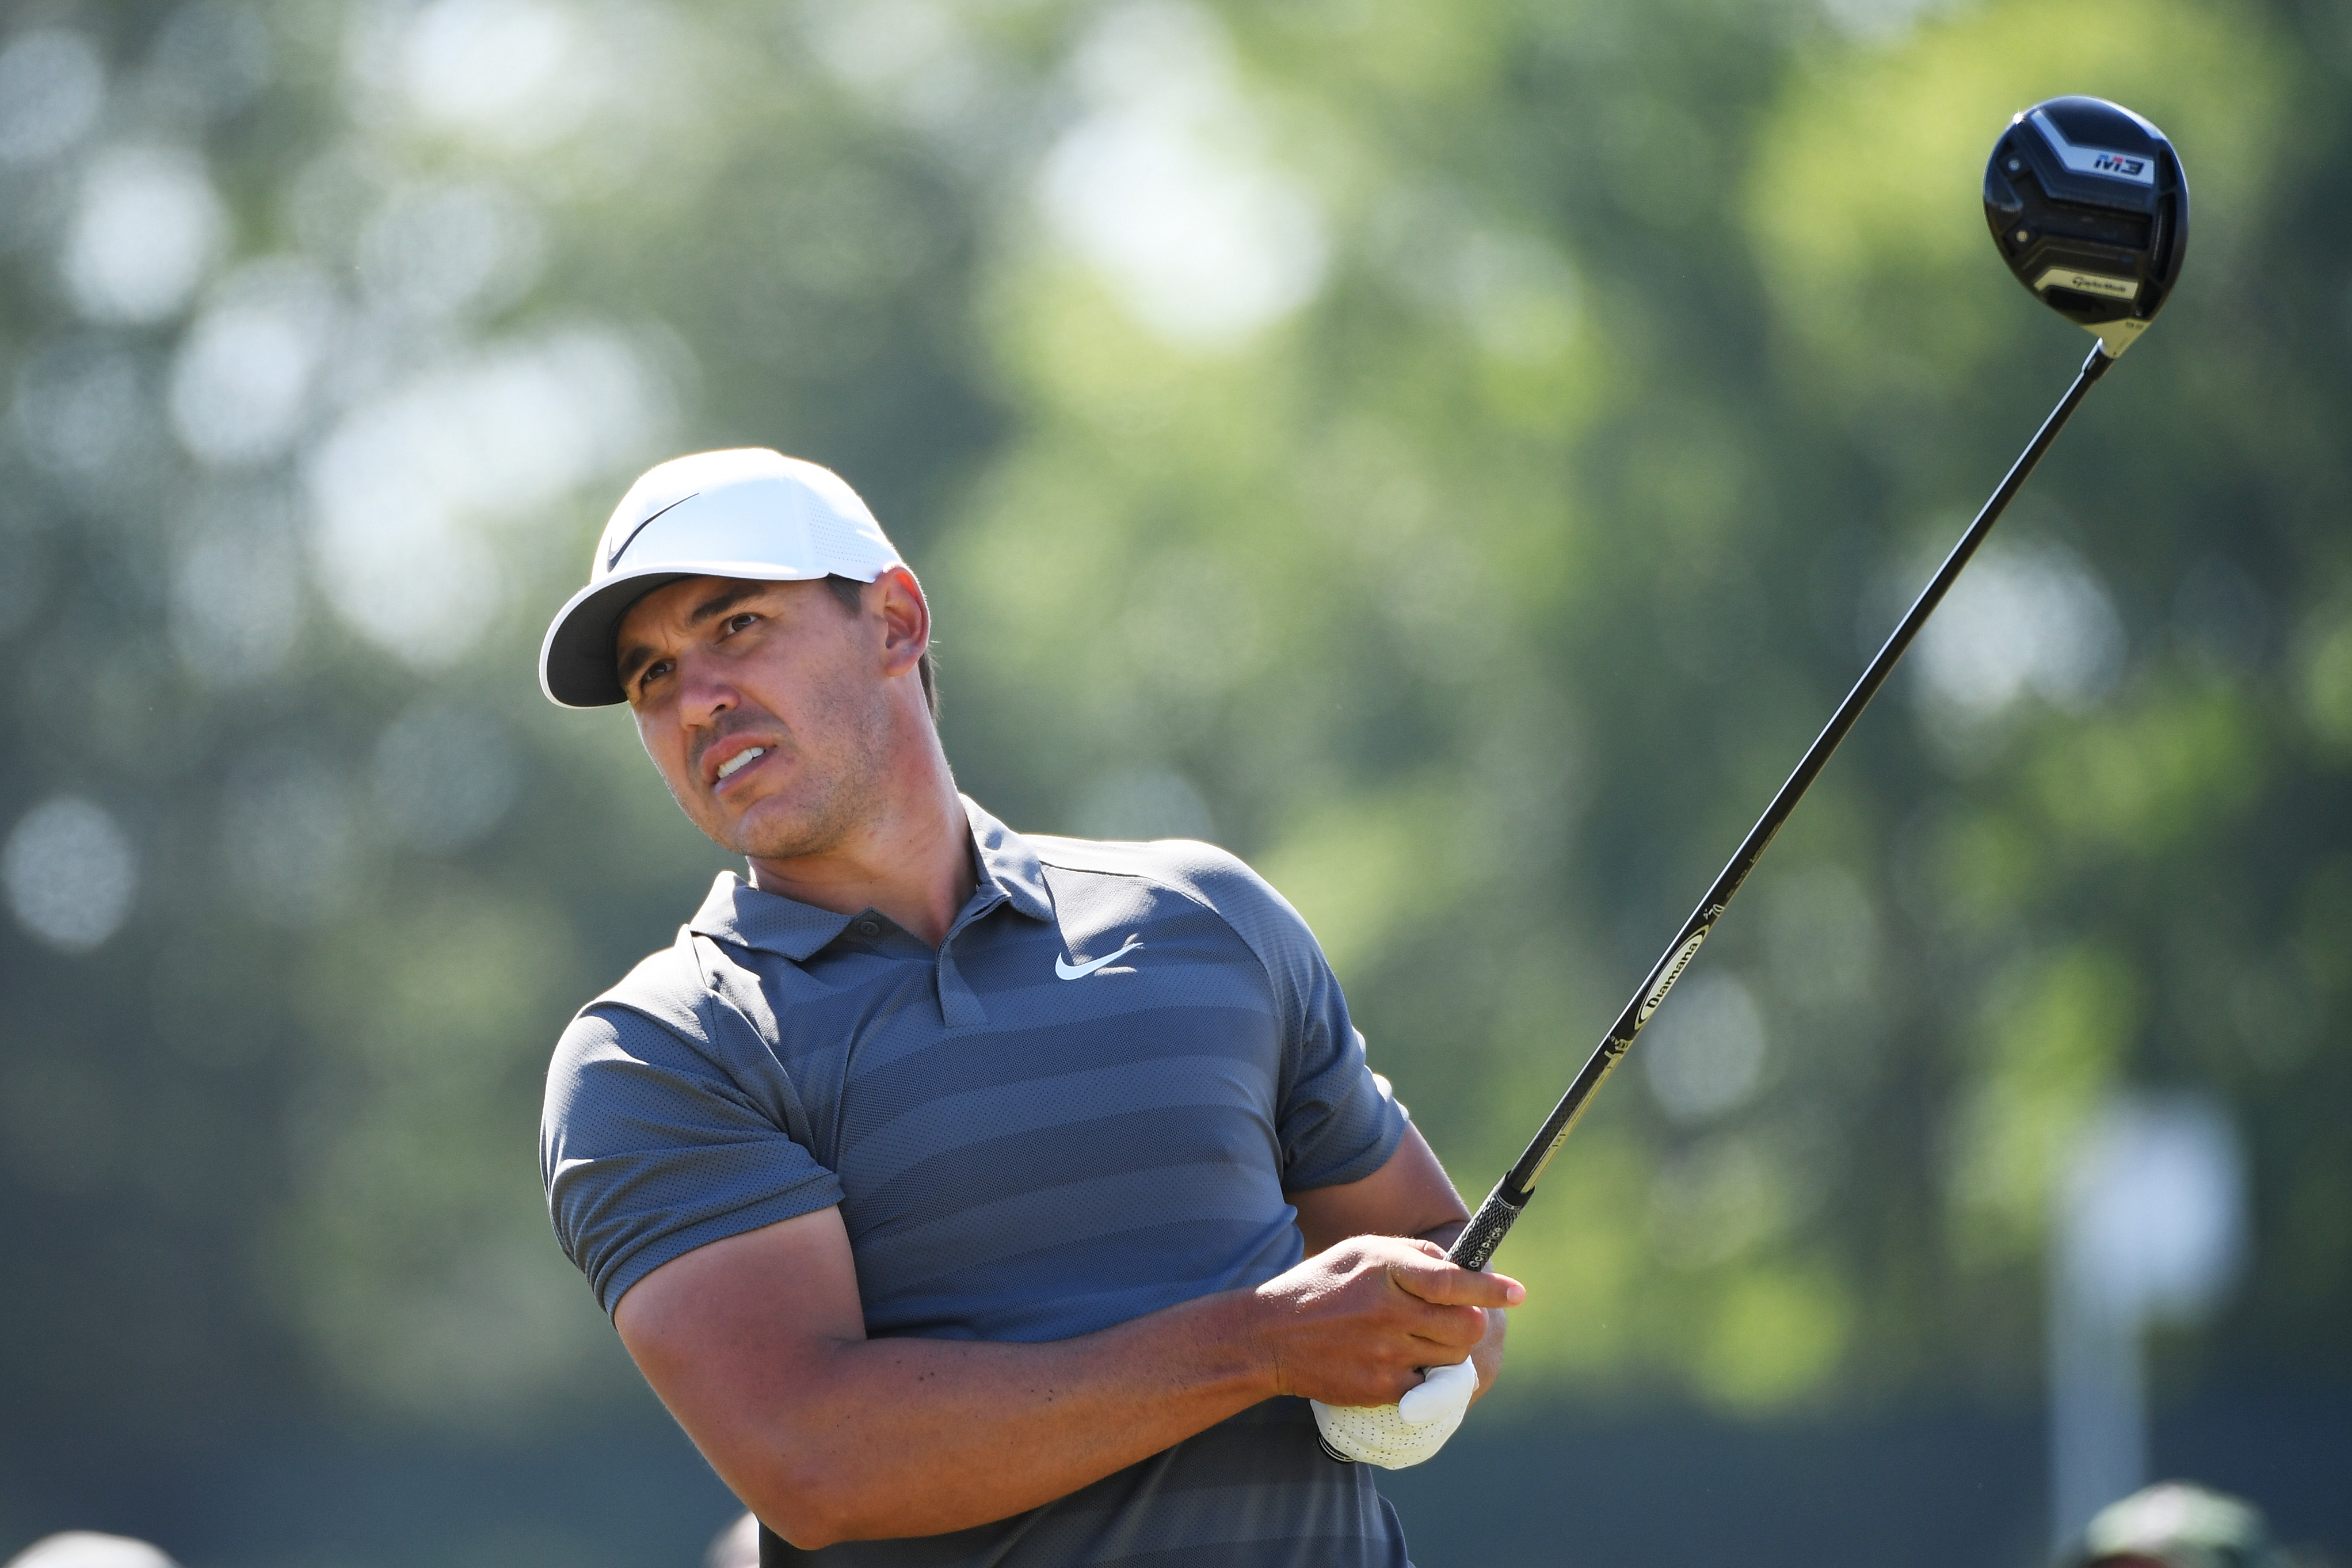 Brooks Koepka: the clubs he used to win the US Open